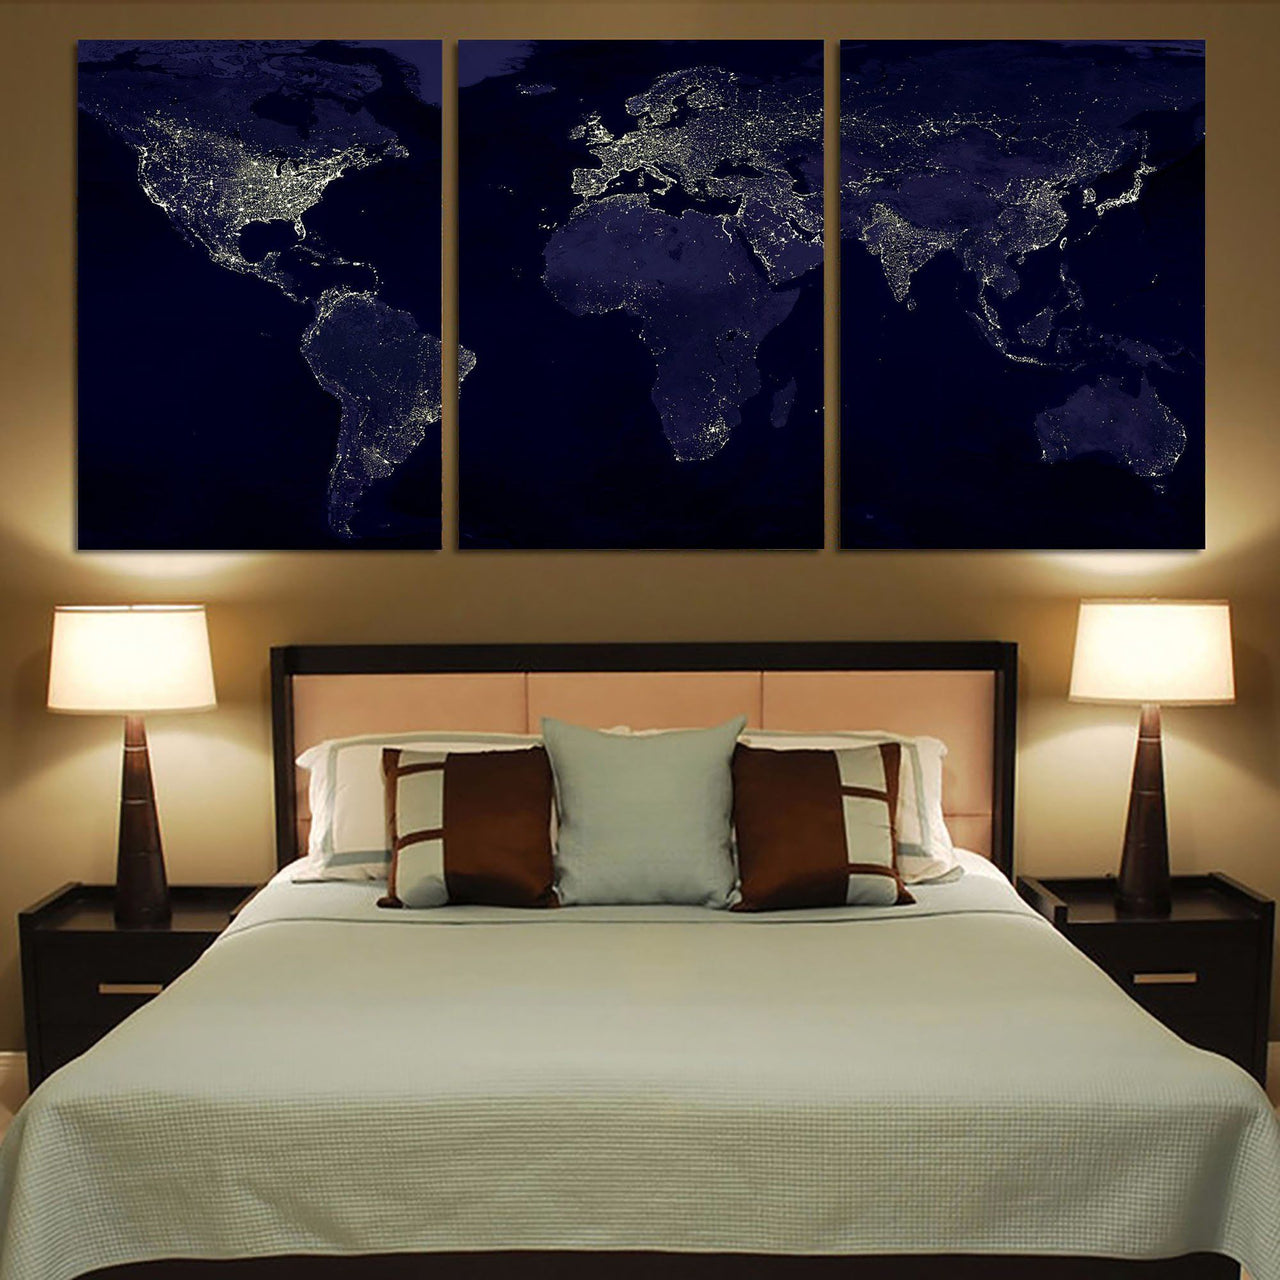 World Map From Space Printed Canvas Posters (3 Pieces) Aviation Shop 